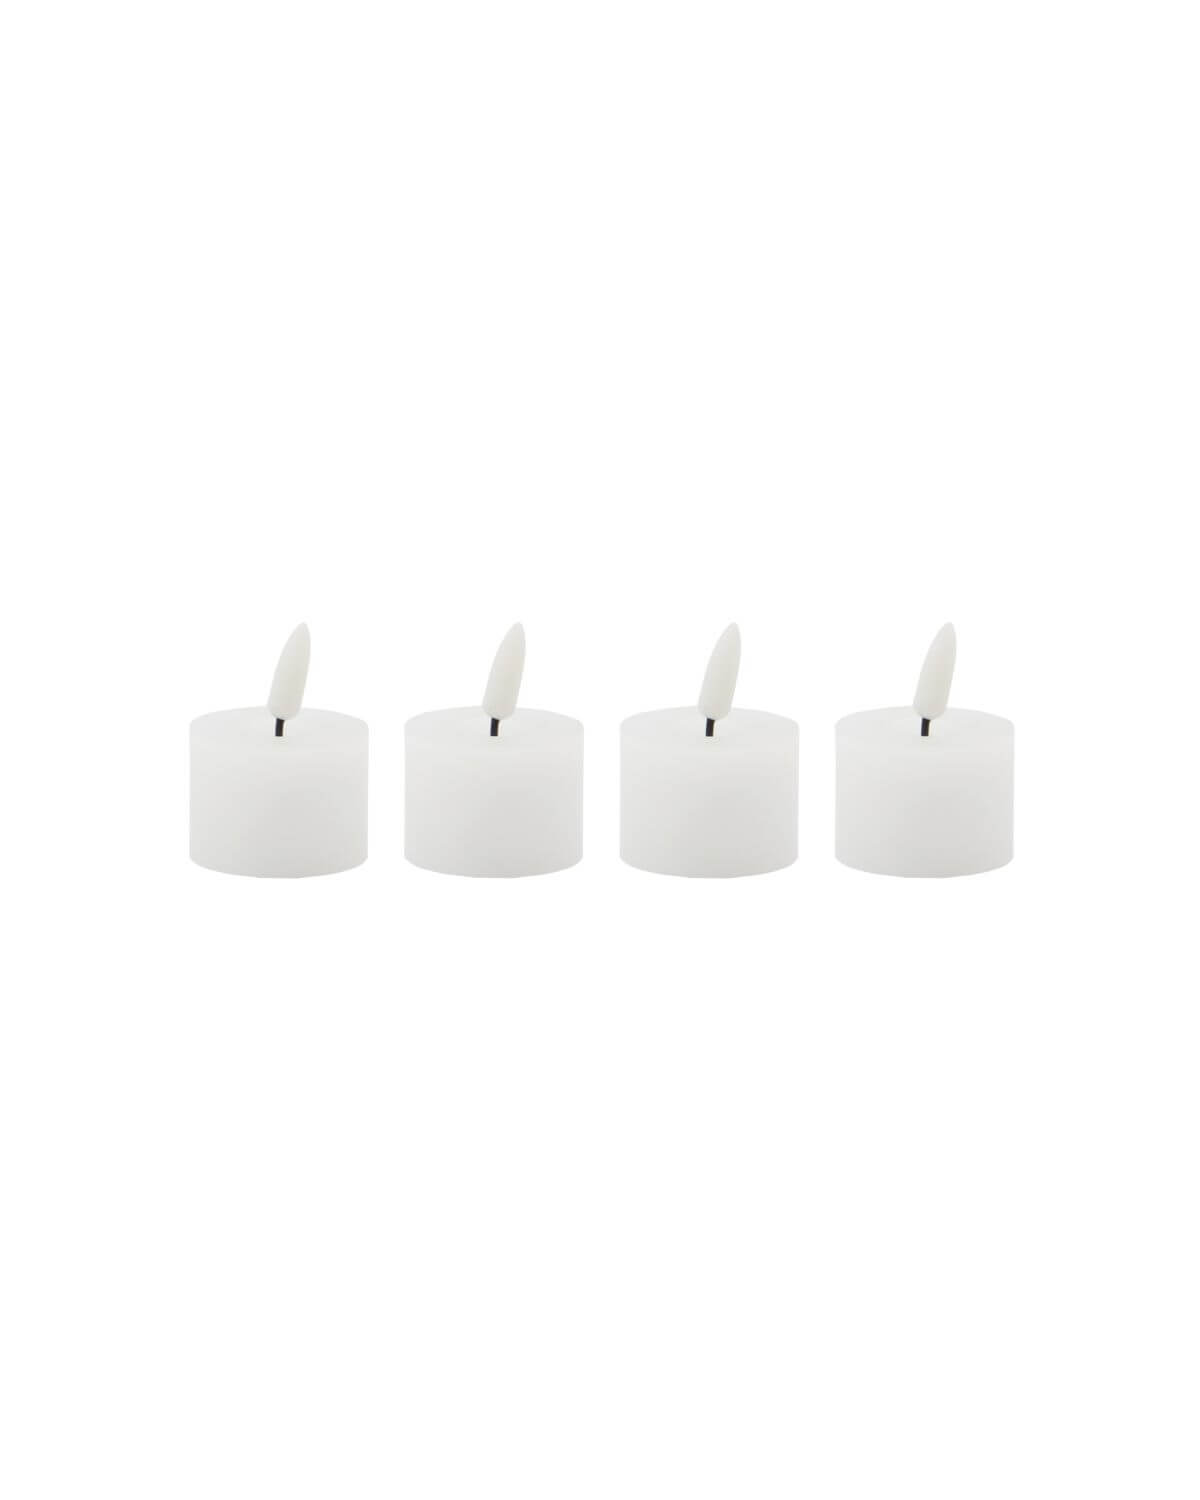 LED Tealights - Set of 4 | by House Doctor - Lifestory - House Doctor